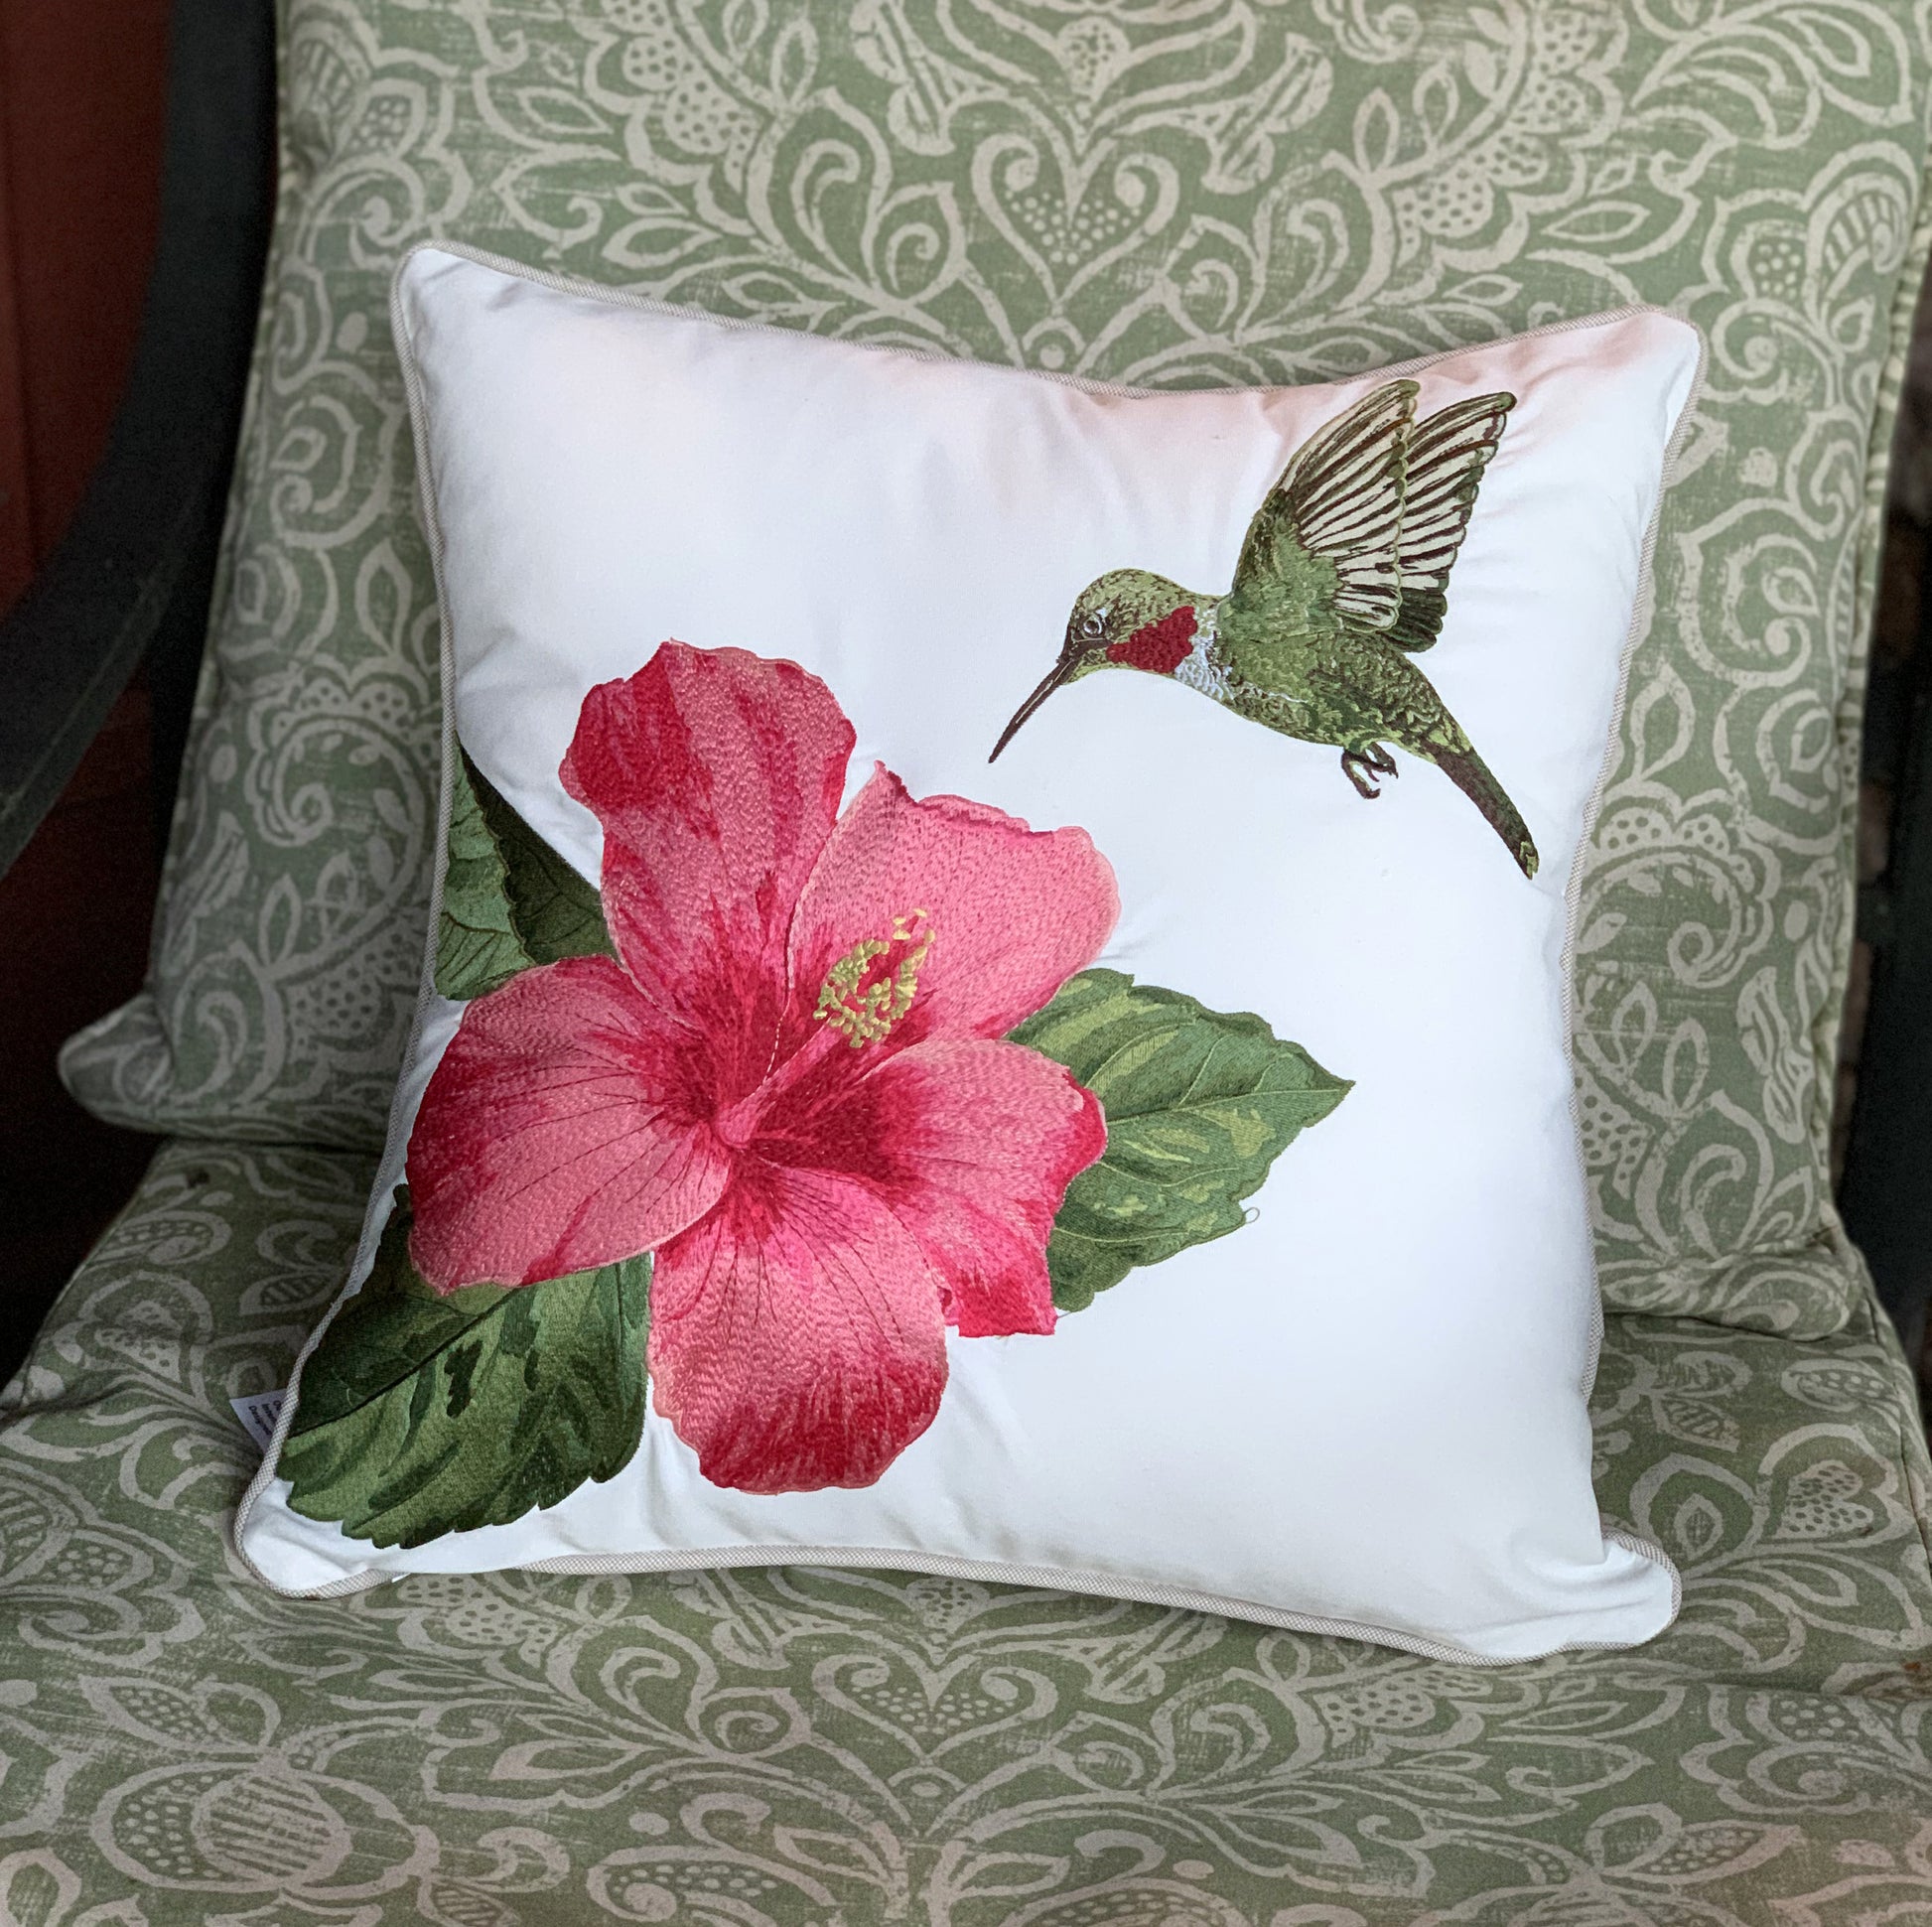 Hummingbird and Hibiscus pillow styled on an outdoor chair.